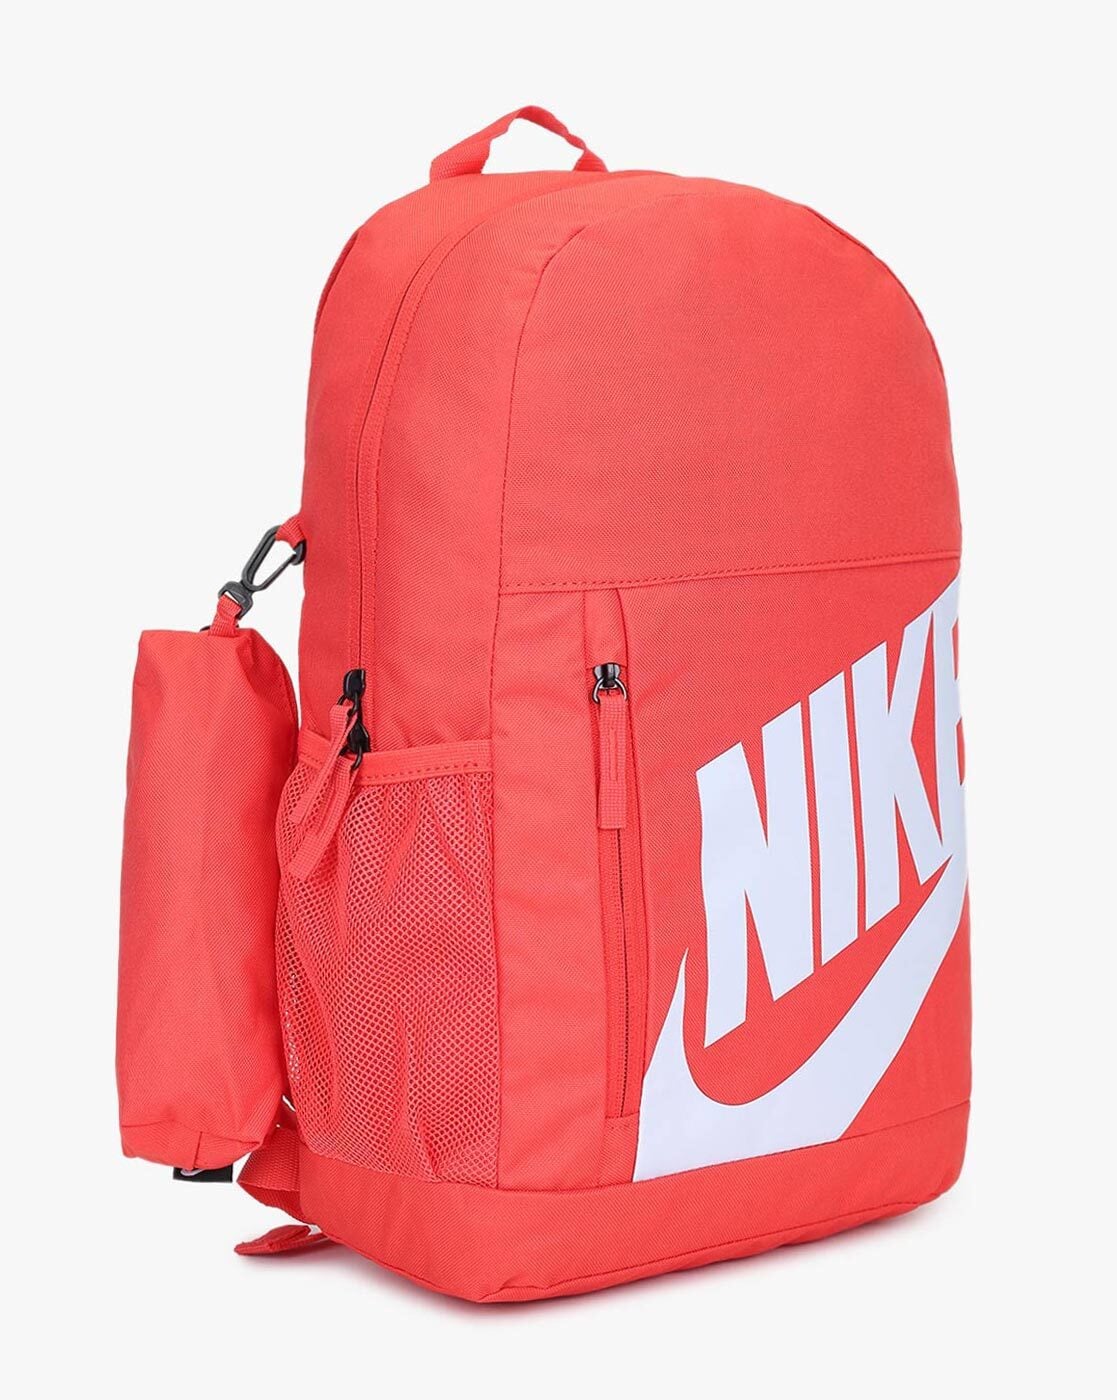 red nike pouch